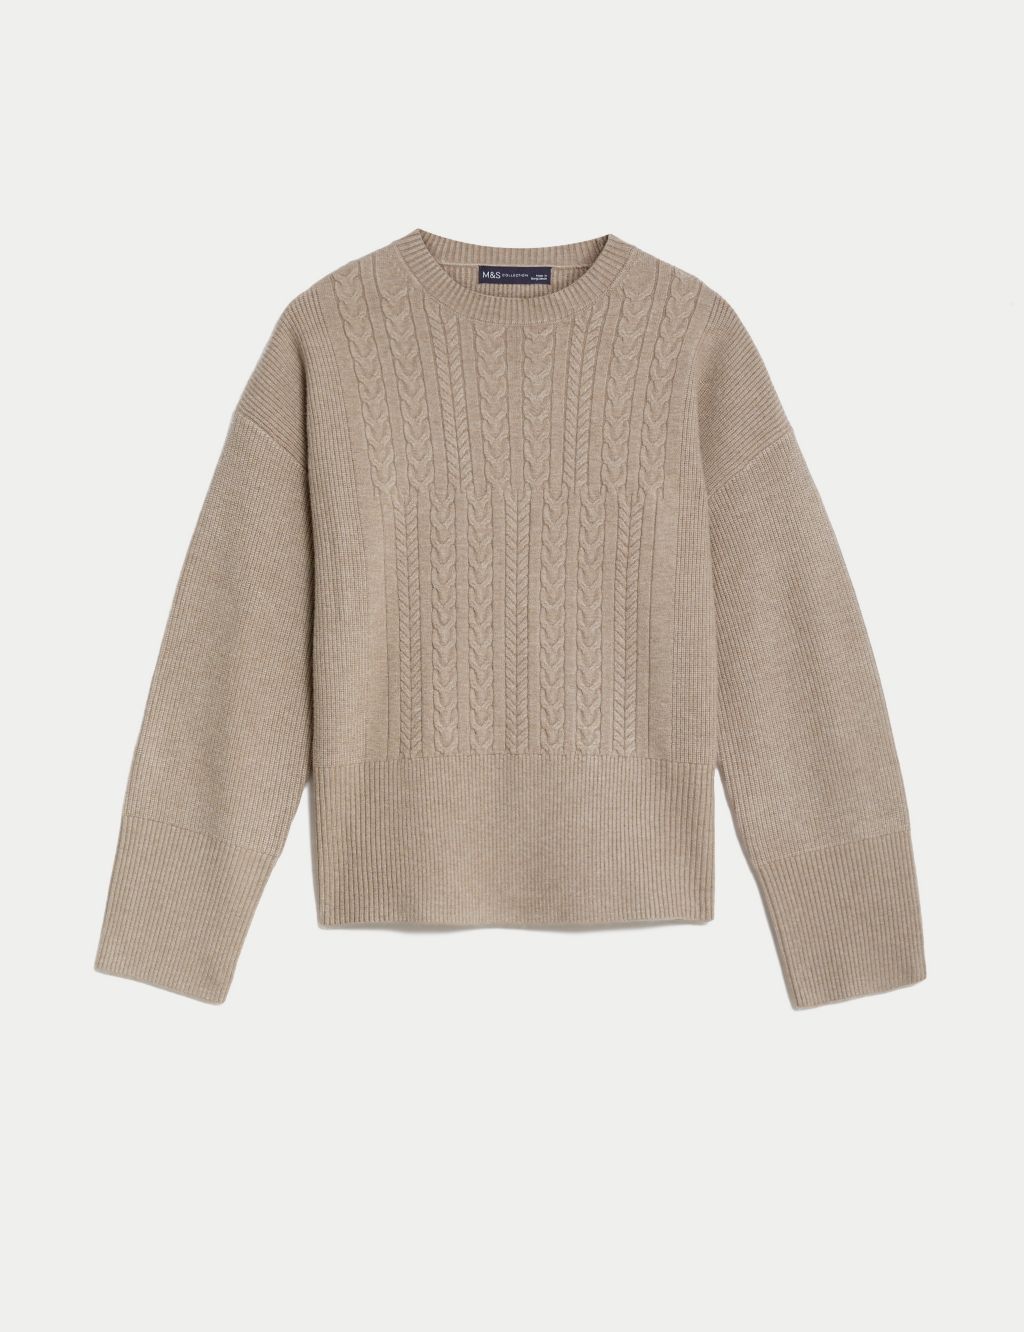 Soft Touch Textured Crew Neck Jumper image 2